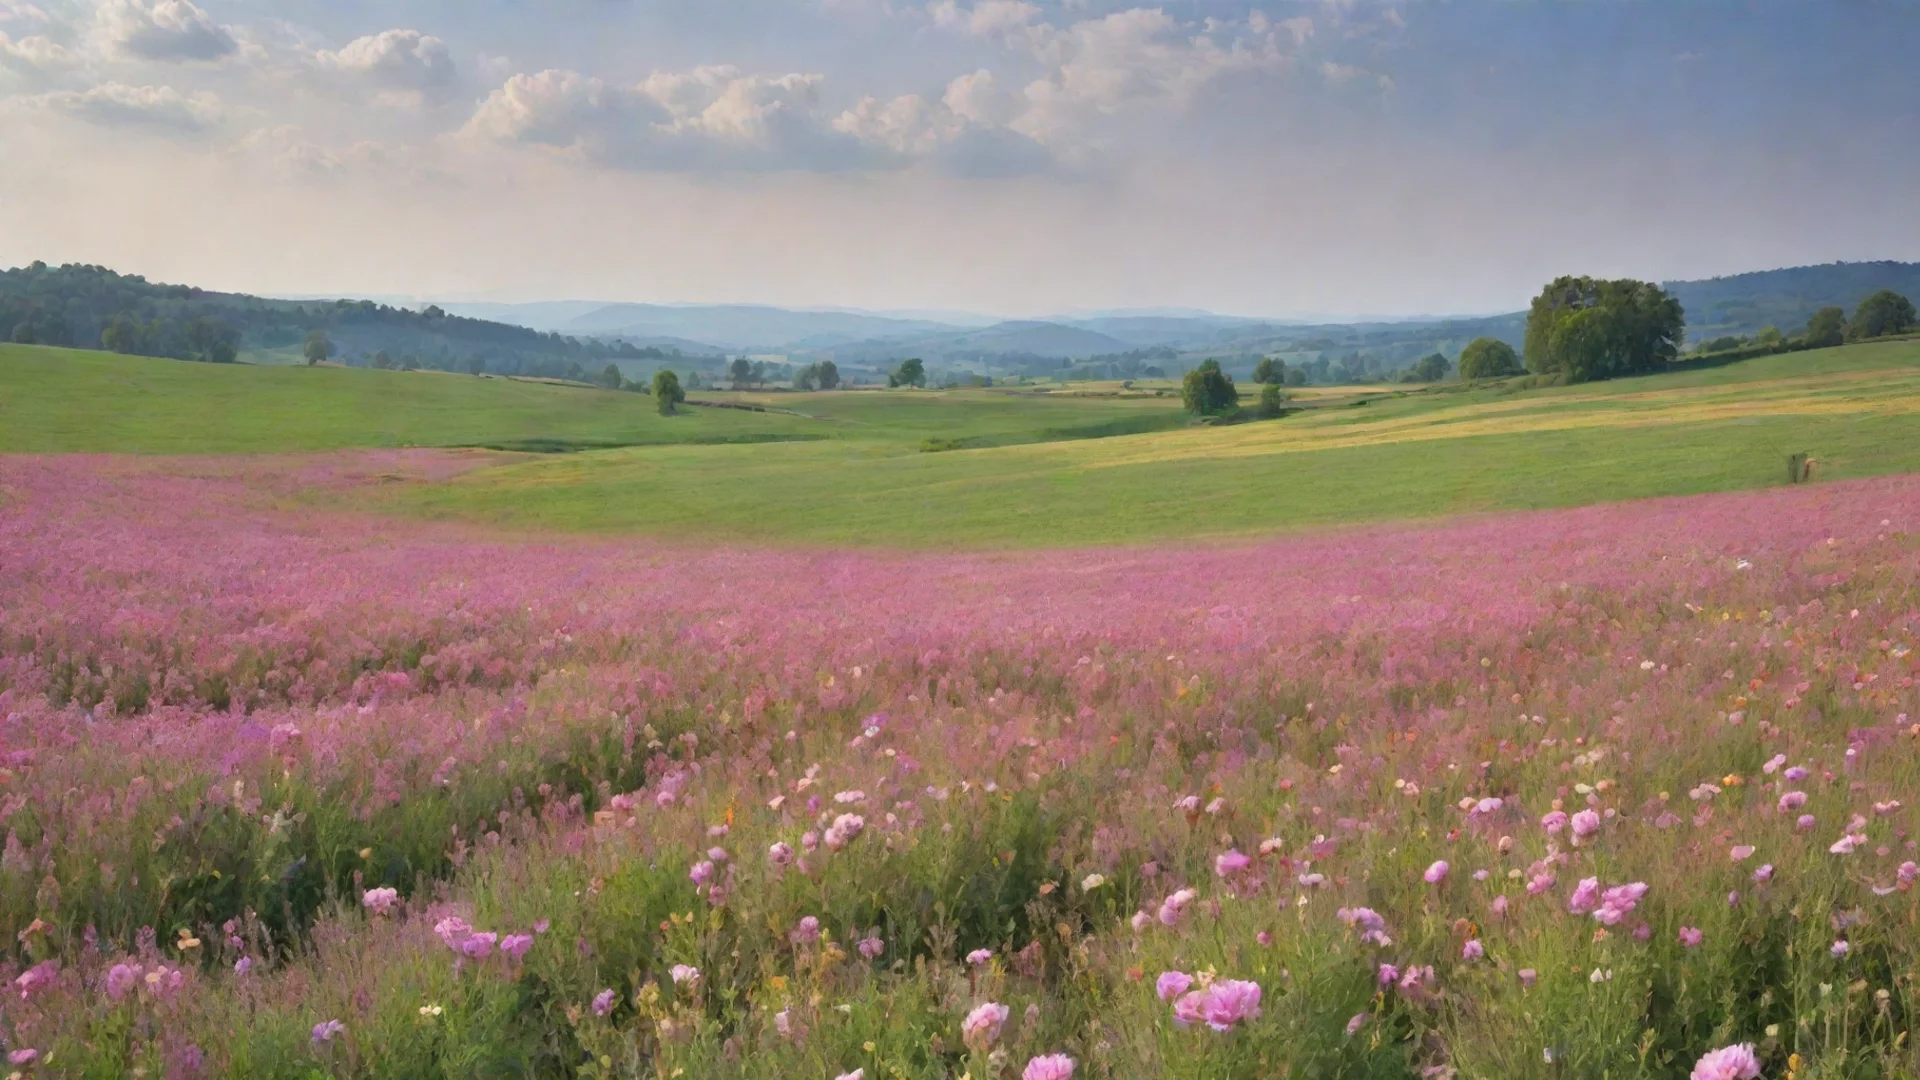 amazing sweeping landscape fields of flowers peaceful relaxing awesome portrait 2 wide